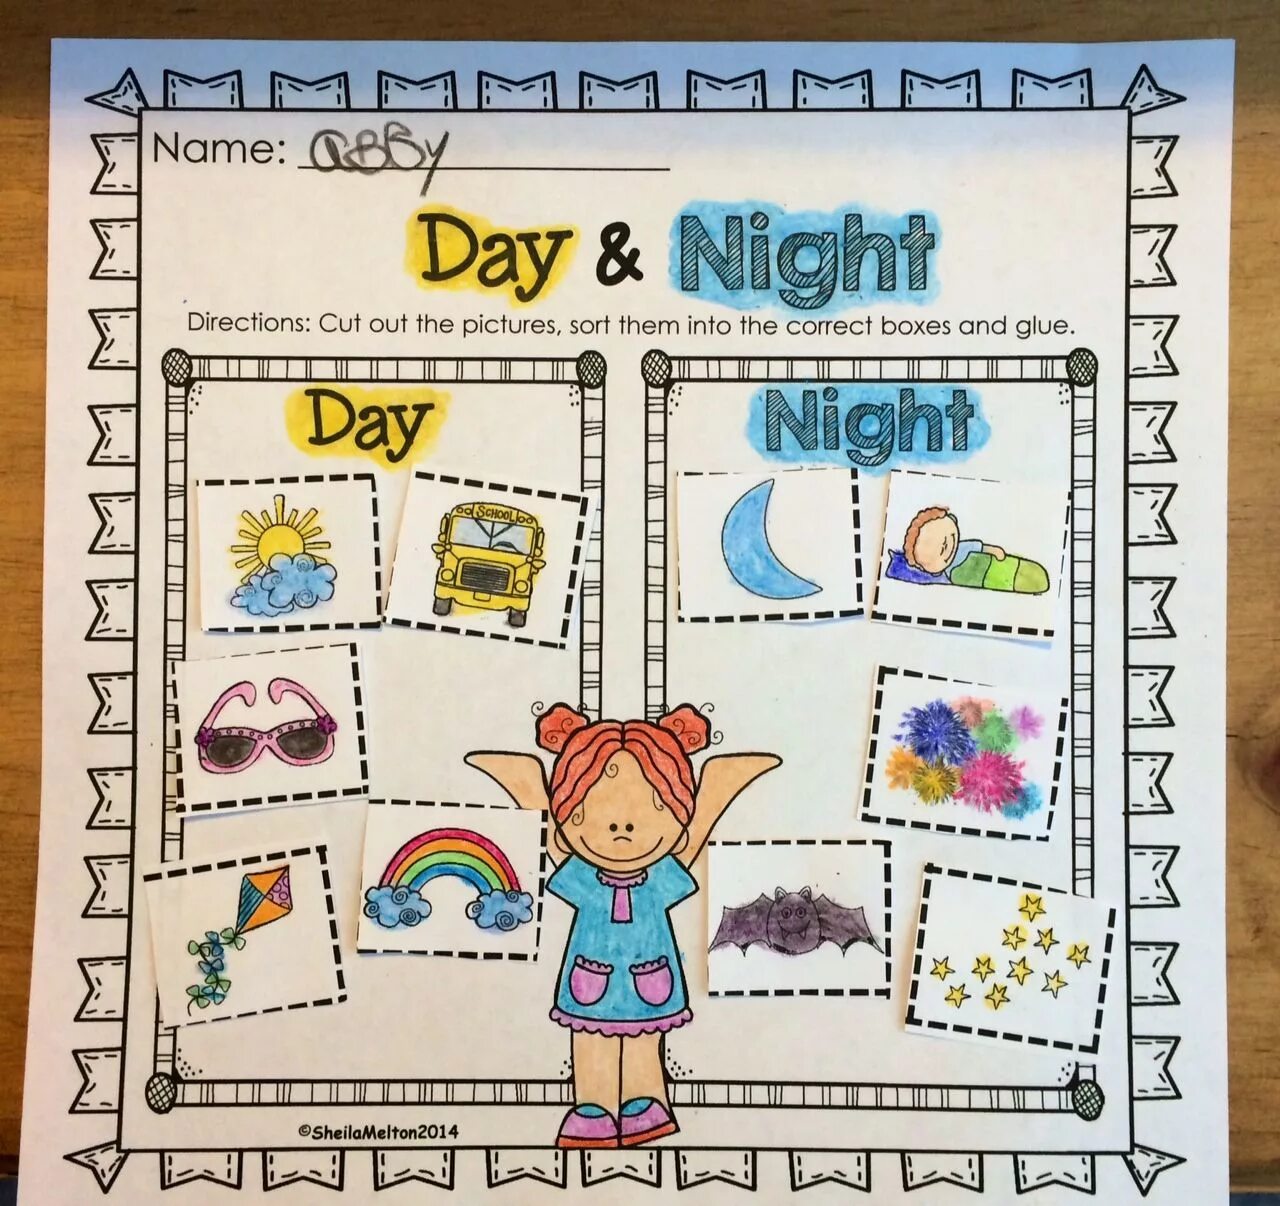 Day in Day out задания. Day Night Worksheet. Day and Night activity. Part of the Day for Kids задания.